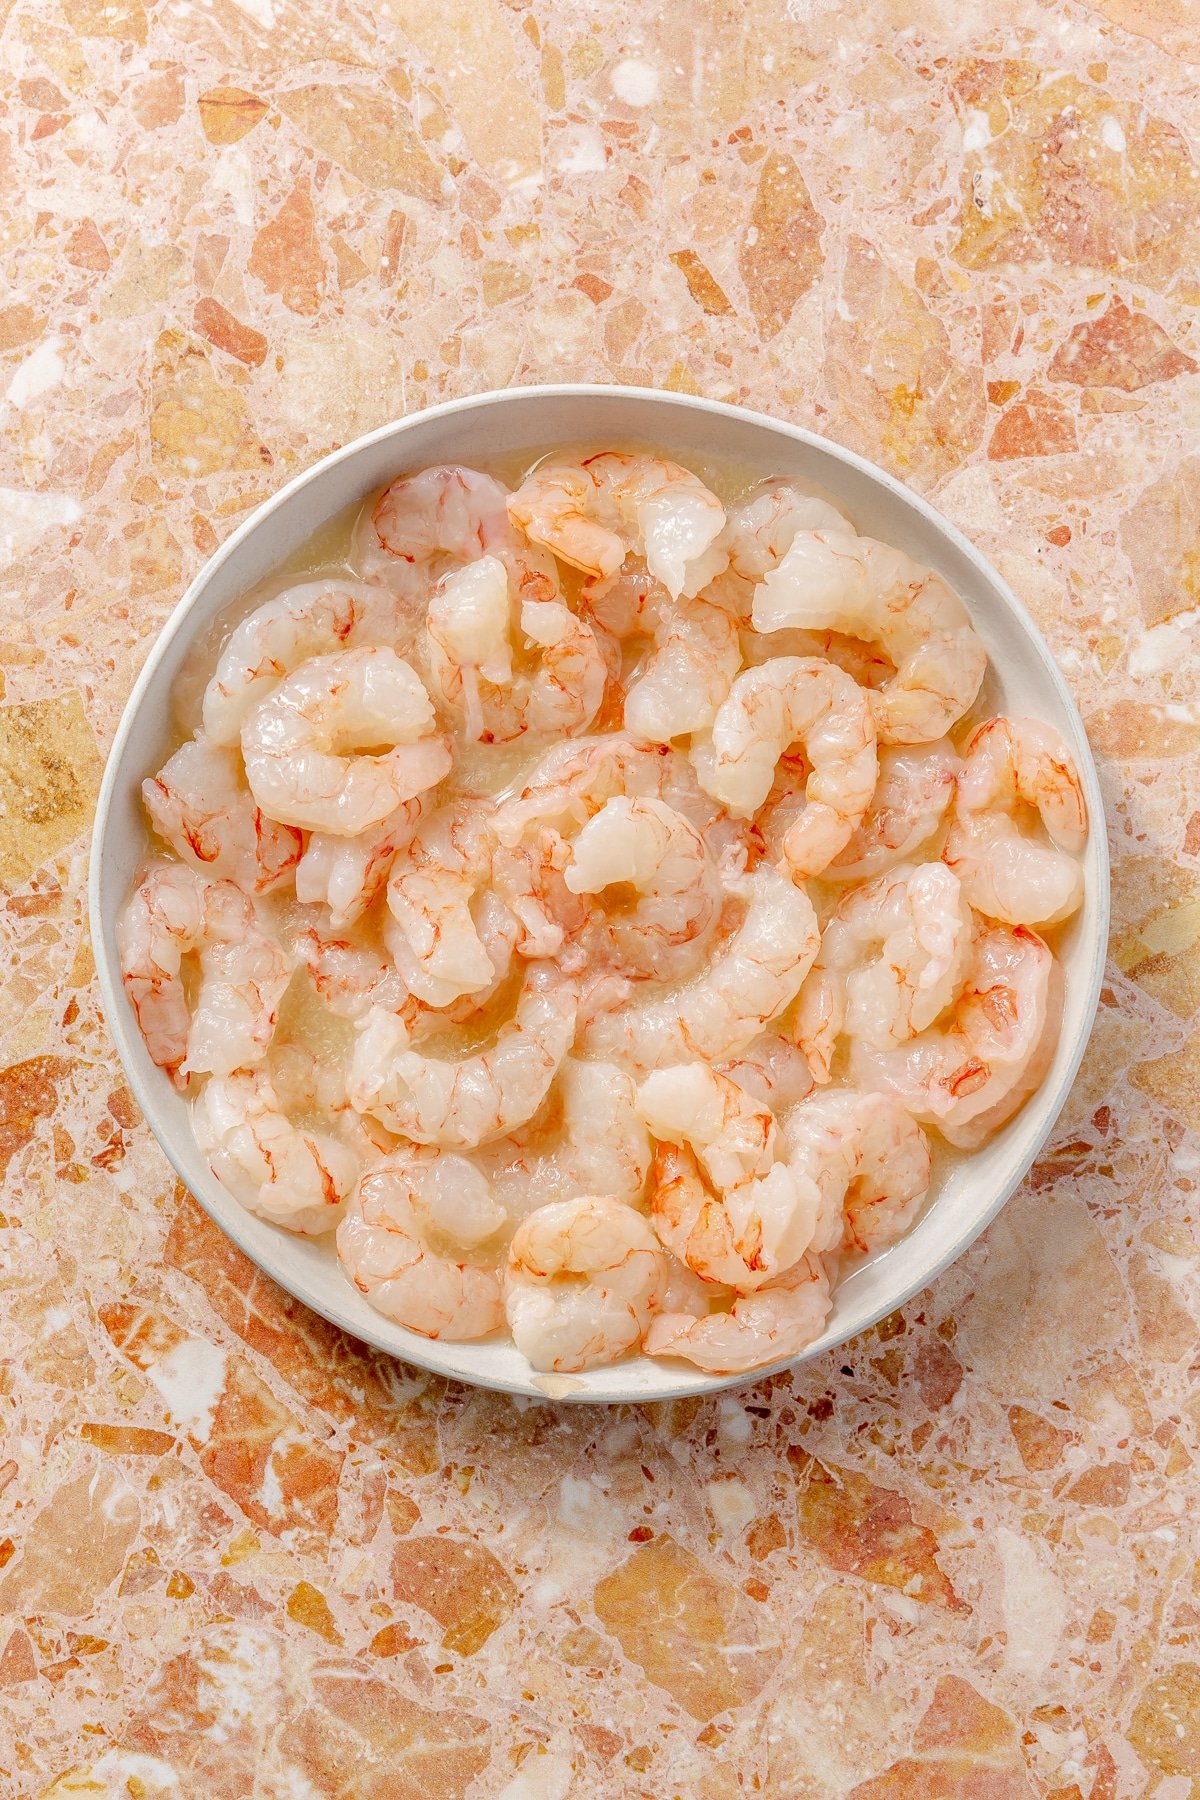 Deveined shrimp sit in a white bowl on a light pink countertop.